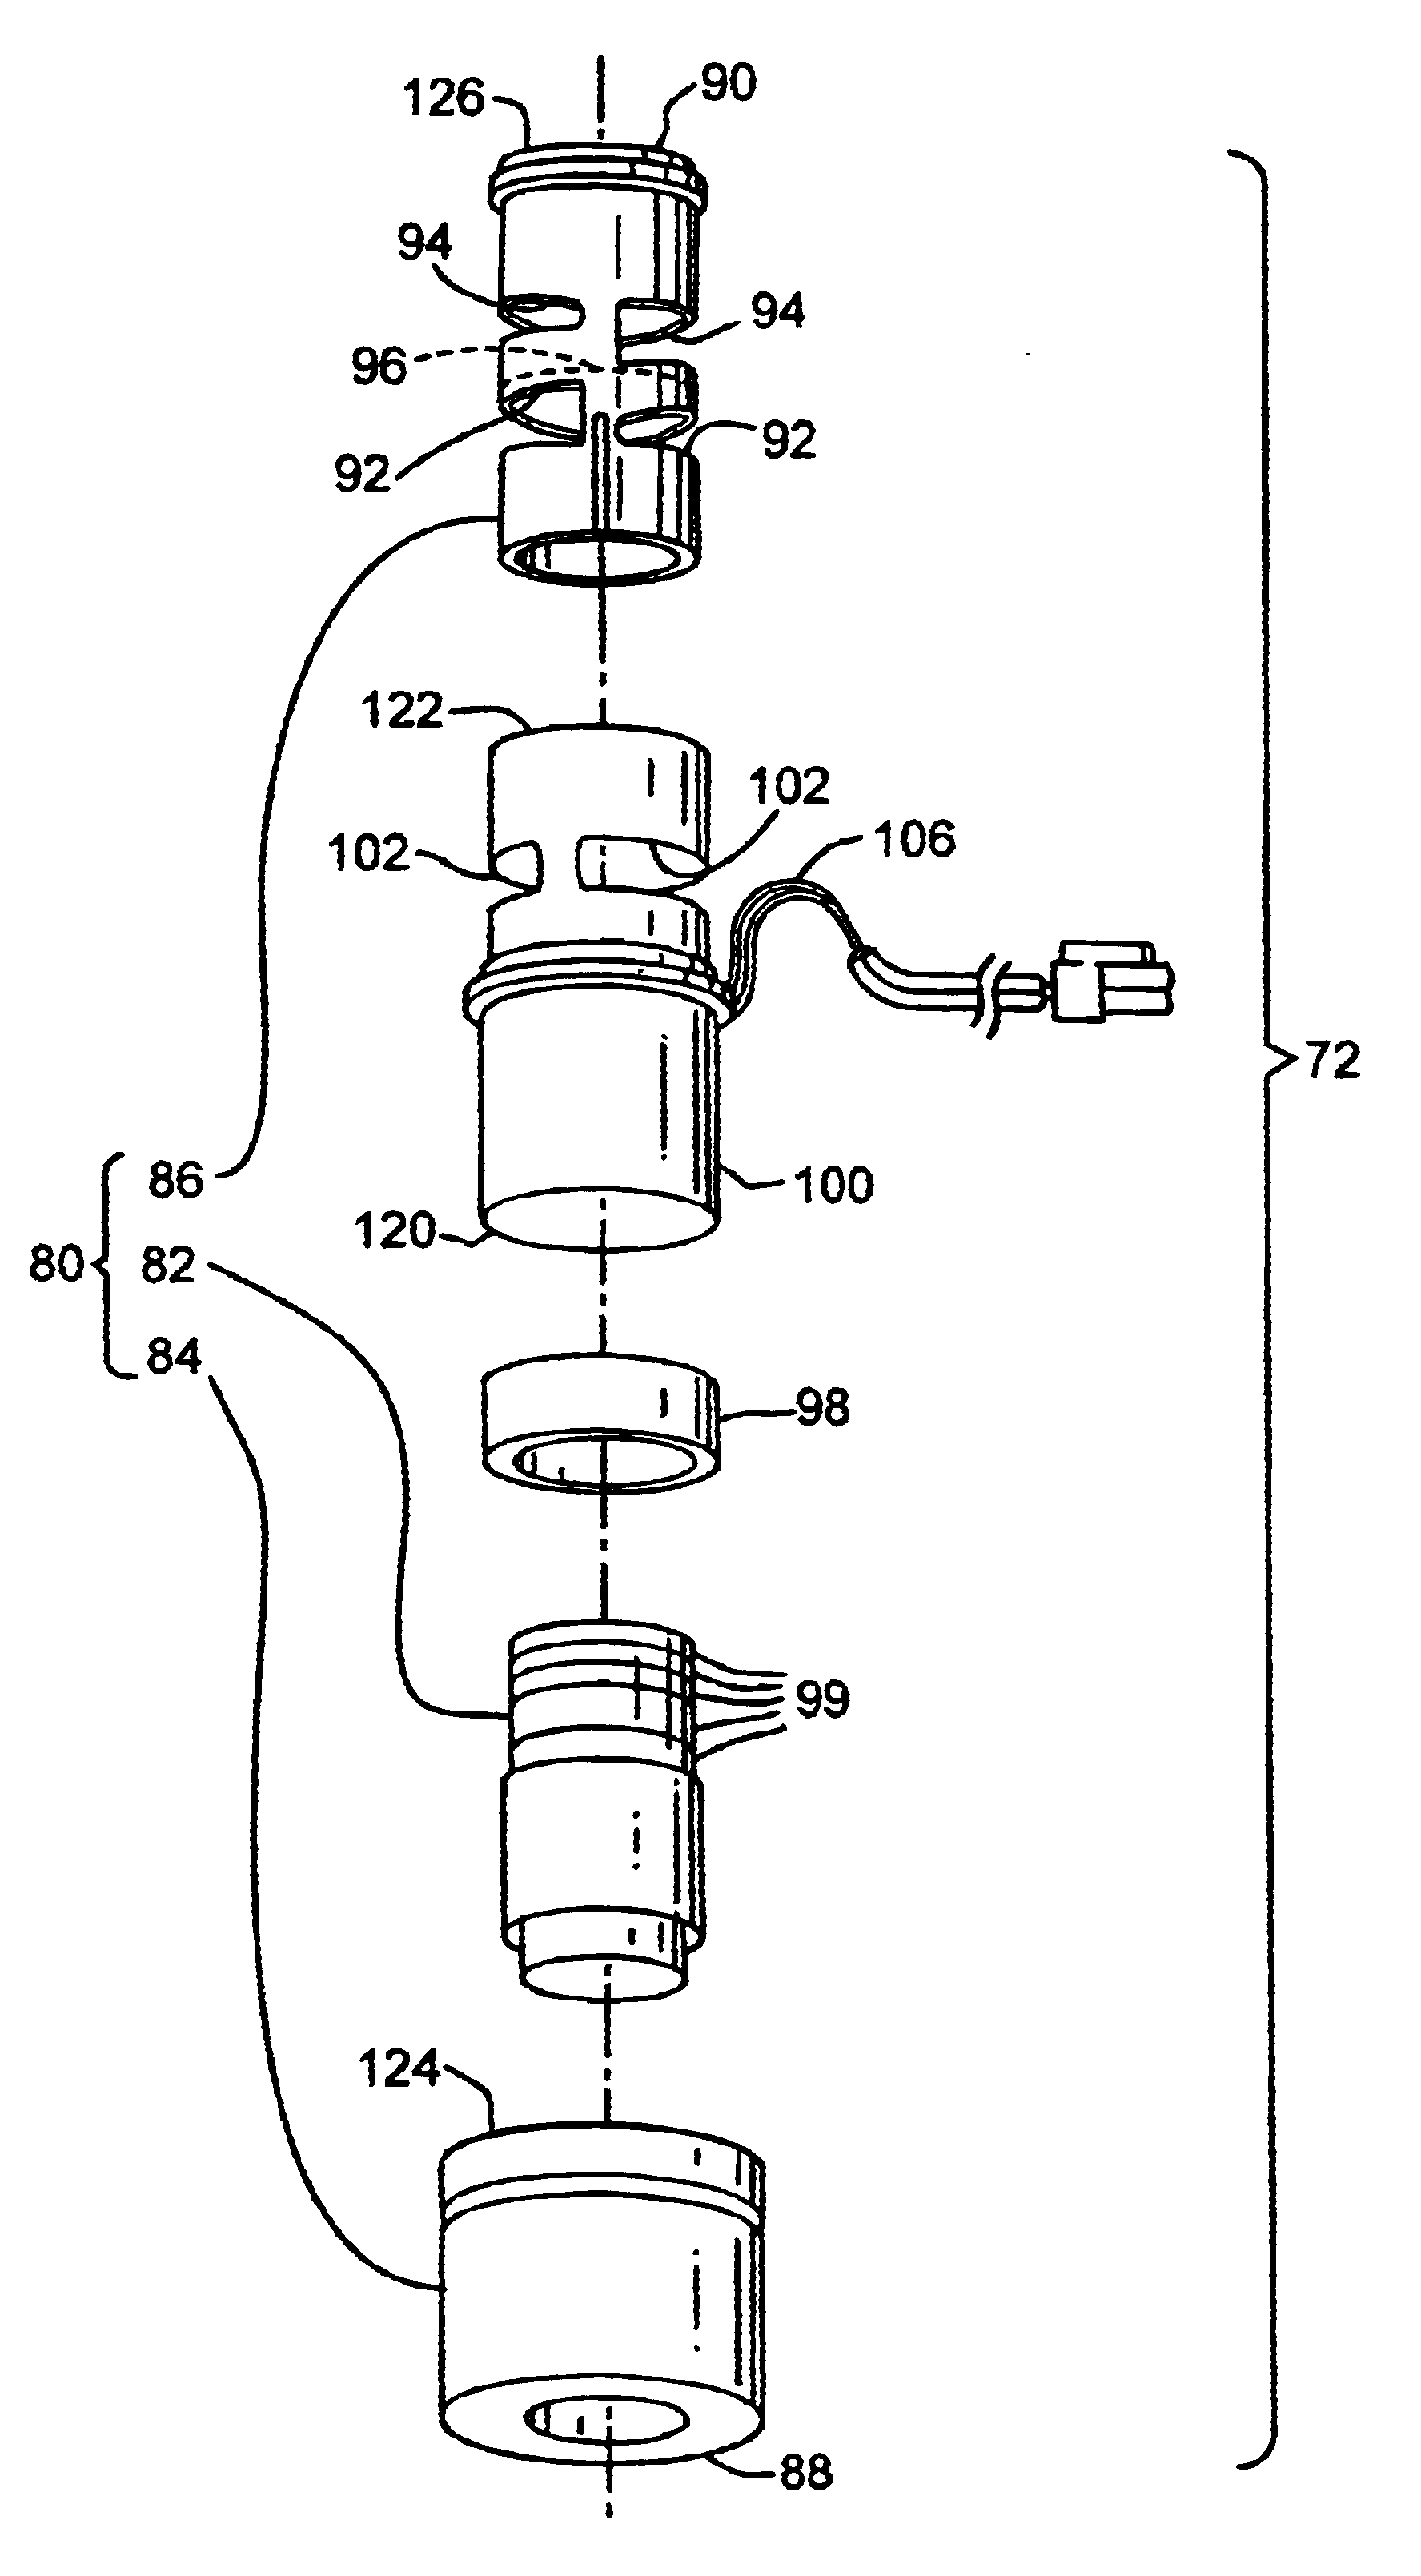 Pressure support system and method and a pressure control valve for use in such system and method